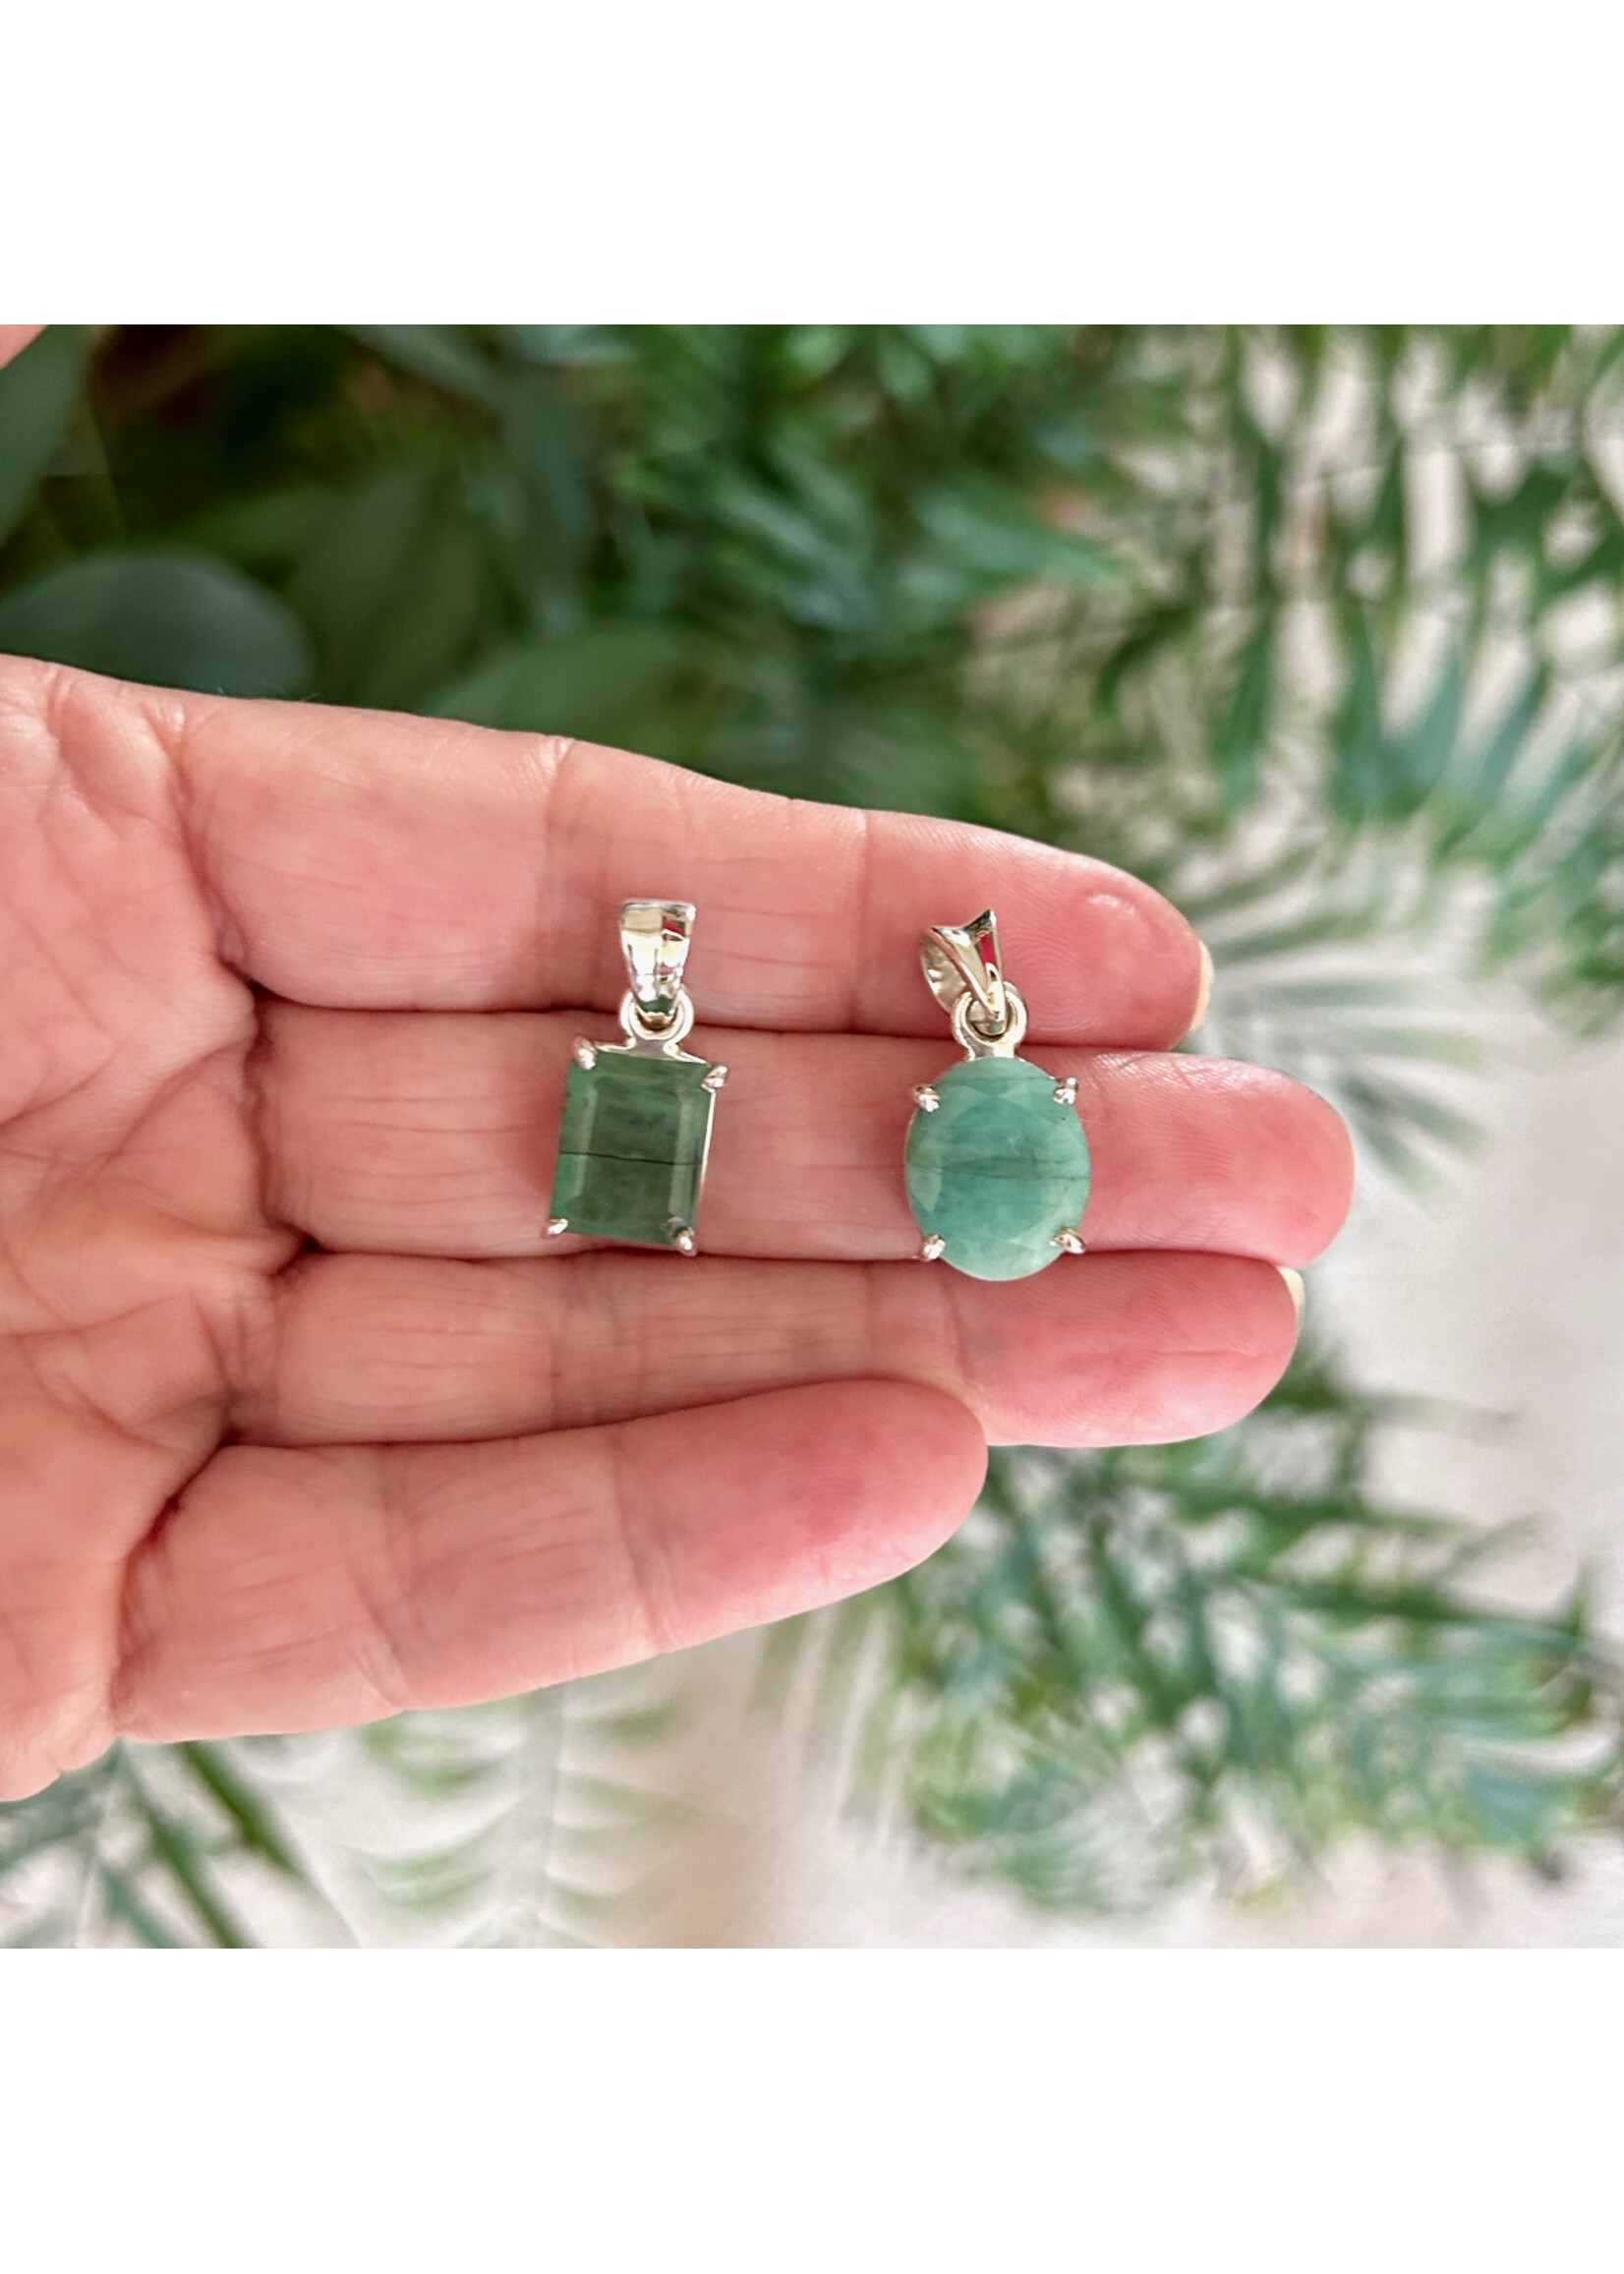 Emerald Faceted Pendants for deep knowing